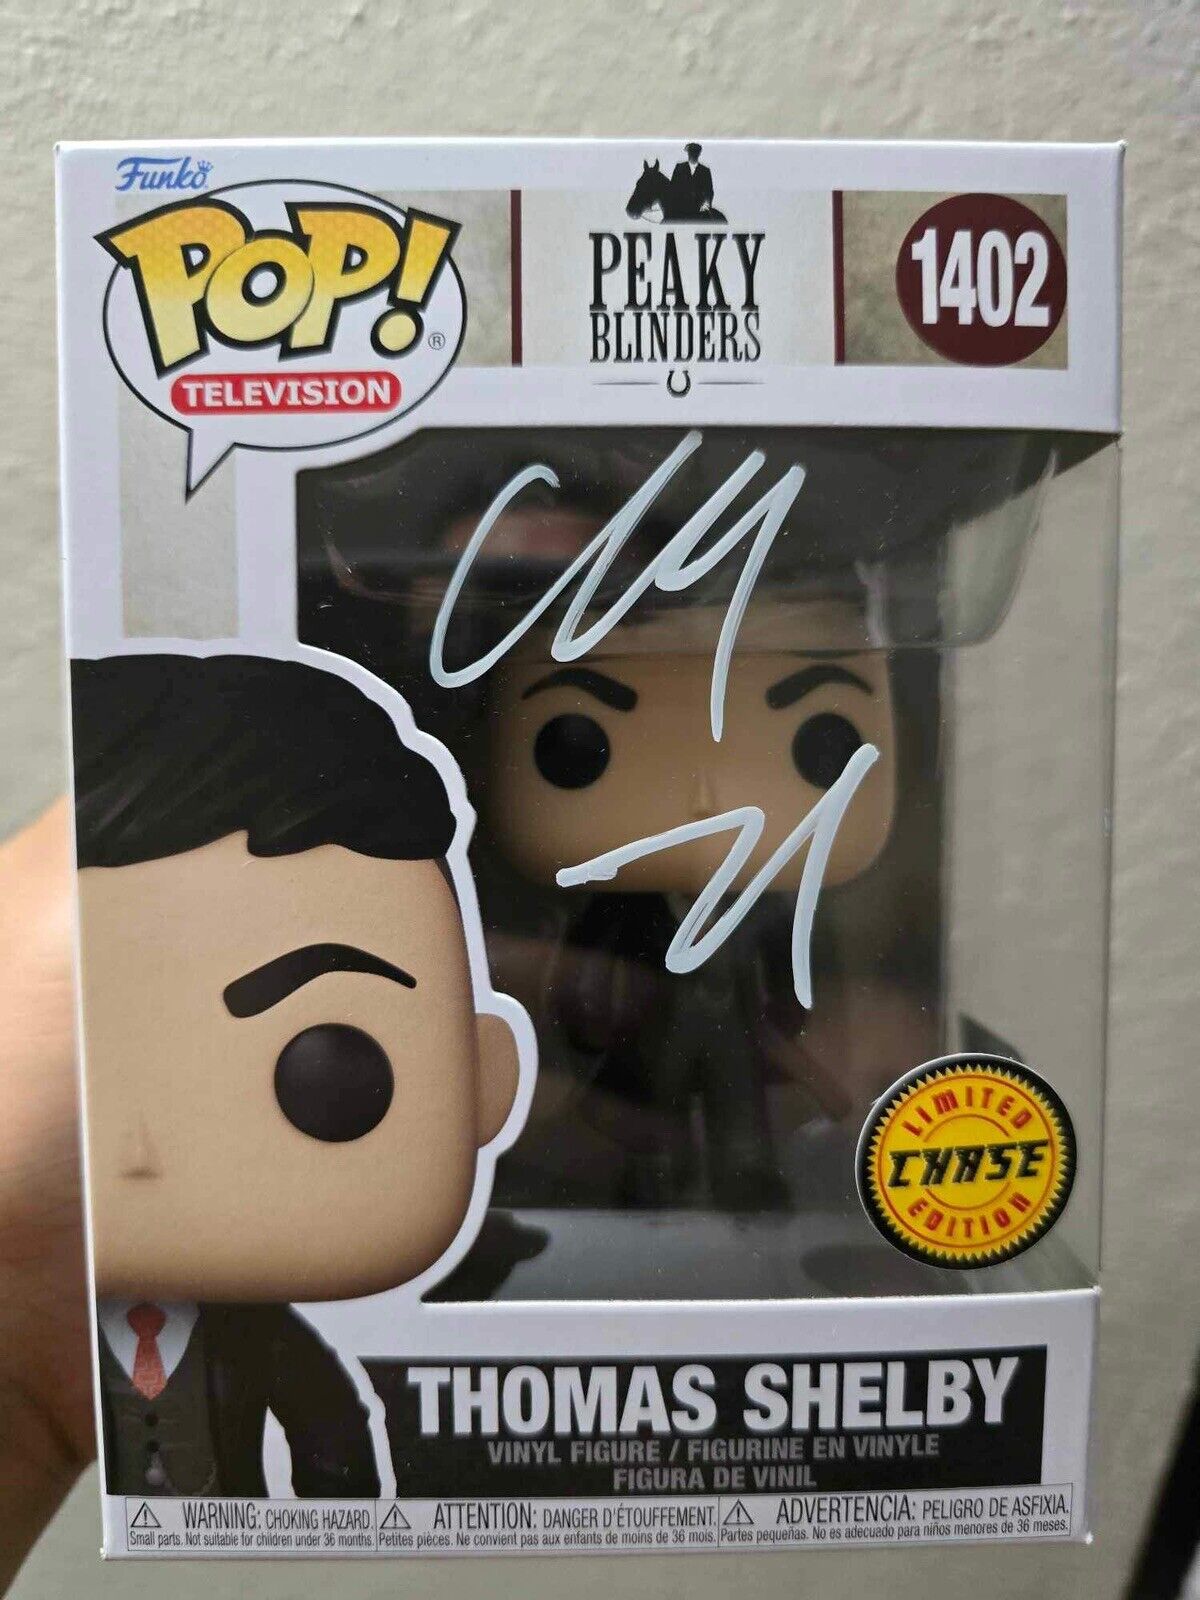 Cillian Murphy Signed Thomas Shelby Funko Pop Chase Figure 1402 Peaky Blinders